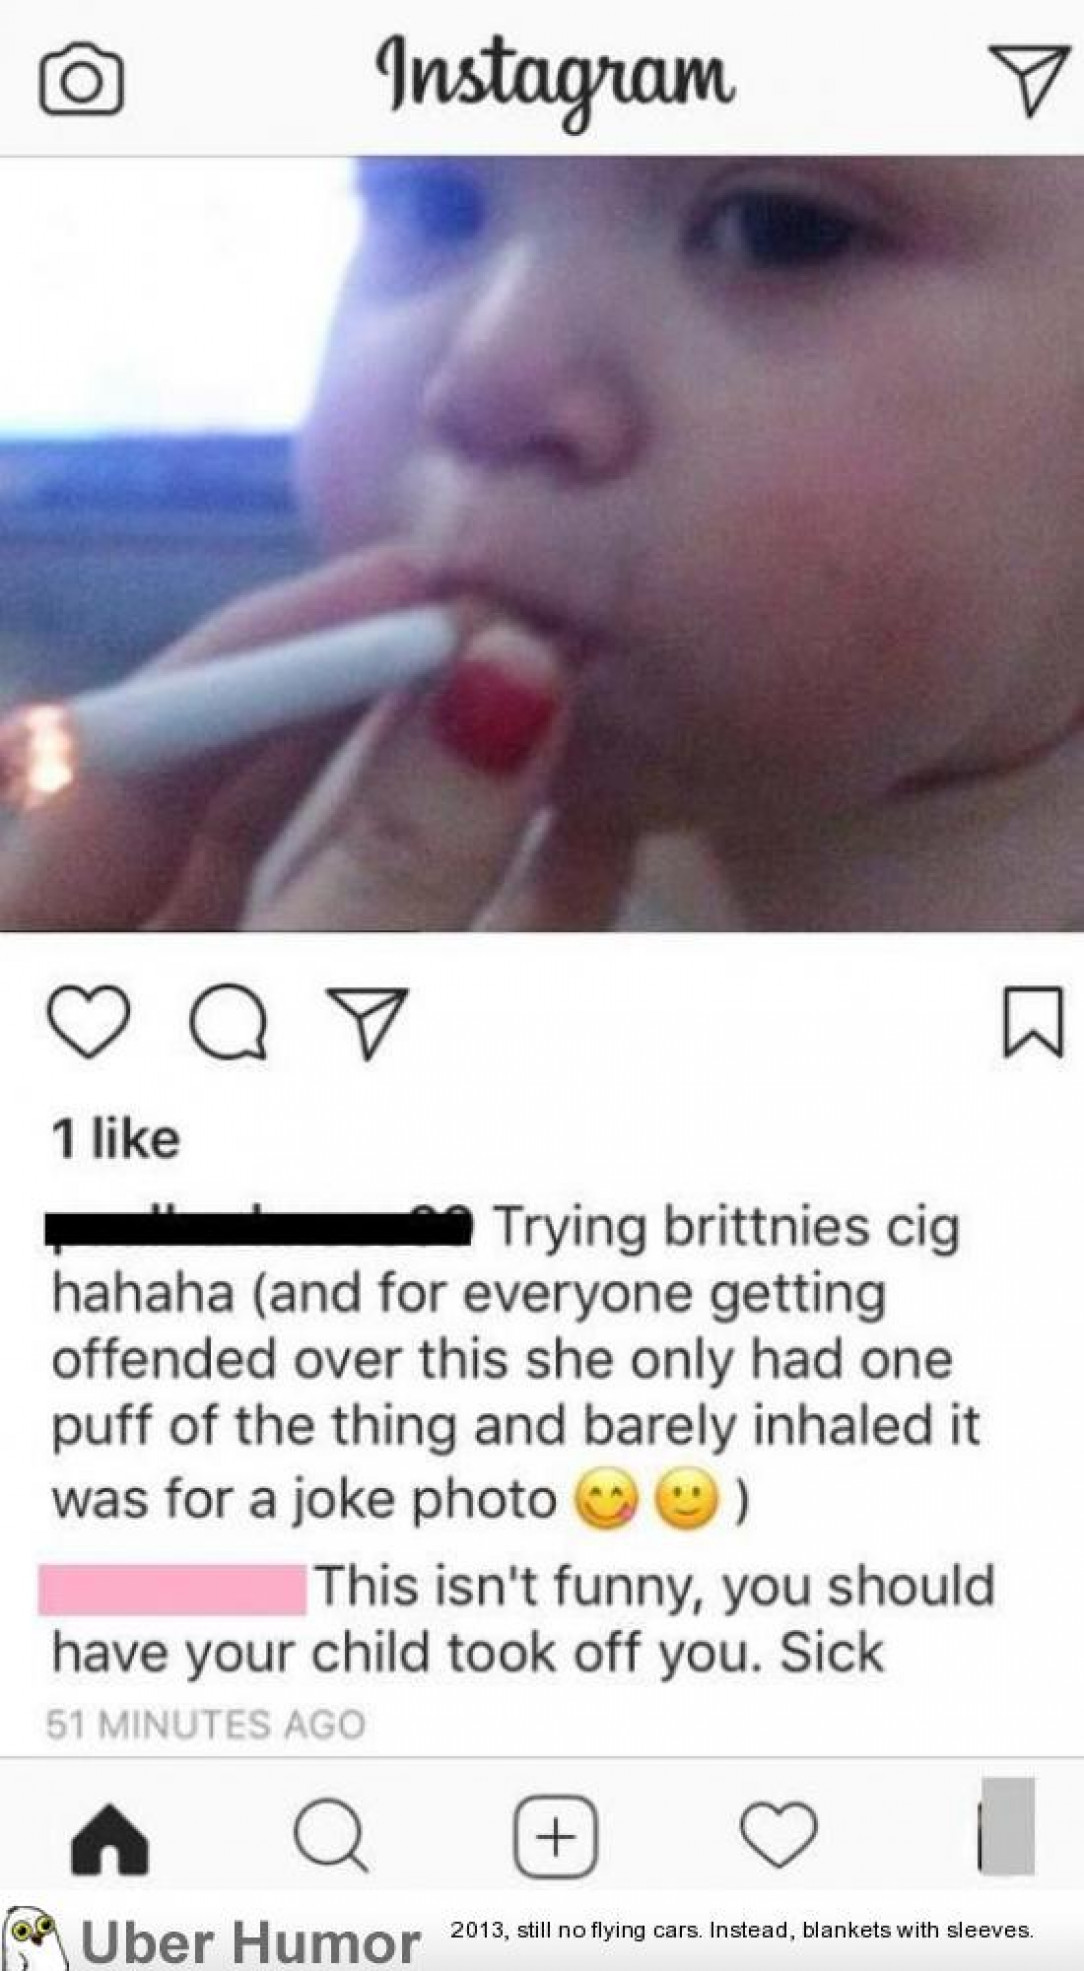 She only had one puff